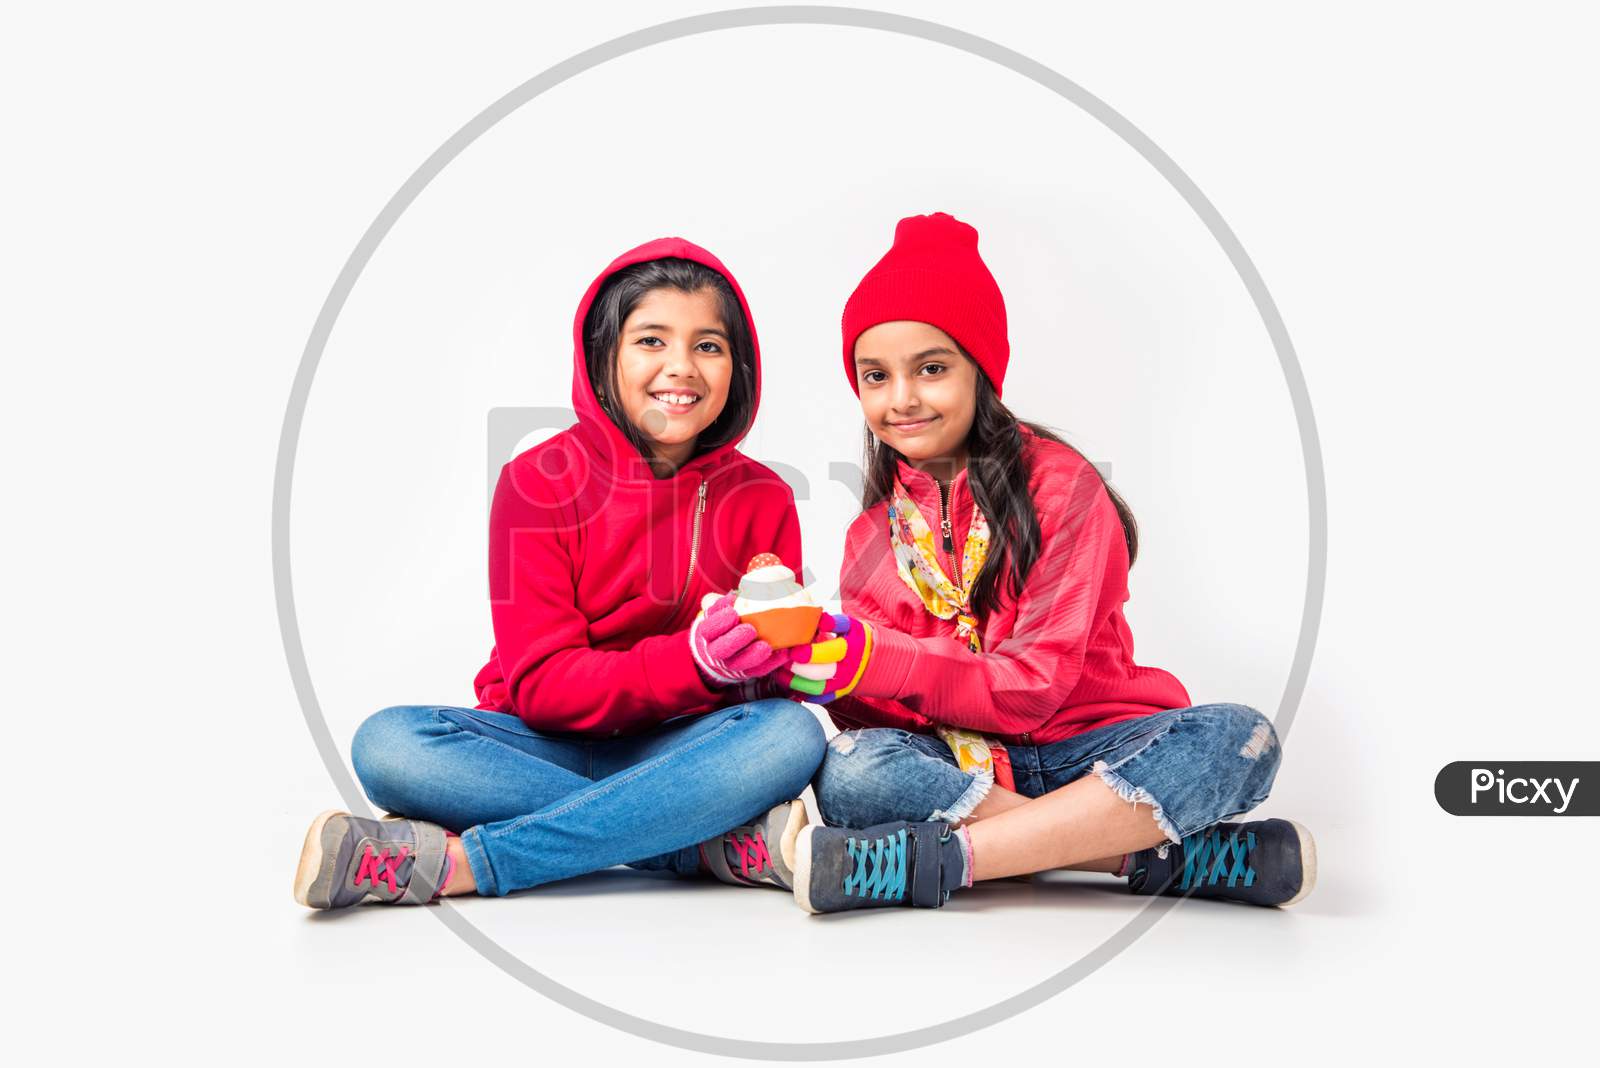 Two Indian little girls in warm cloths sitting and playing against white background